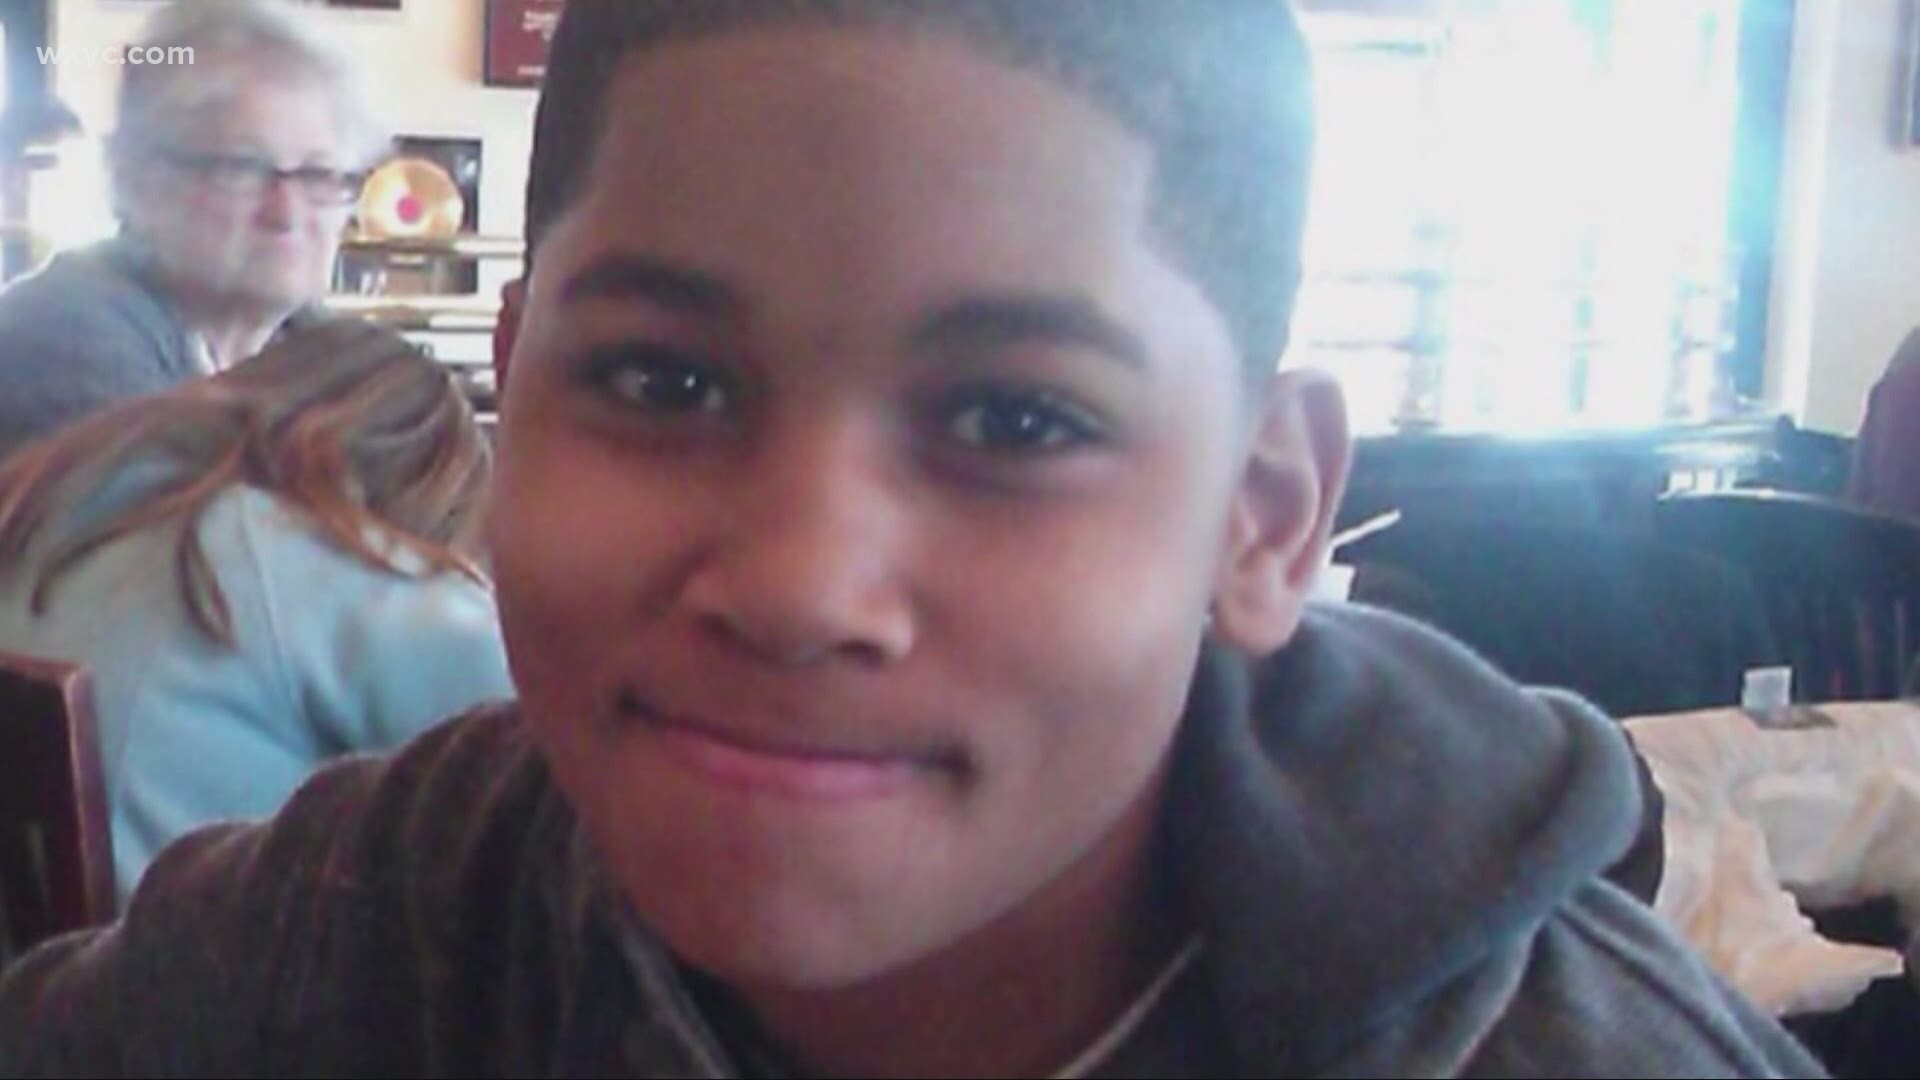 Tamir was playing with a pellet gun outside a recreation center in Cleveland on Nov. 22, 2014. He was shot and killed by a Cleveland police officer.